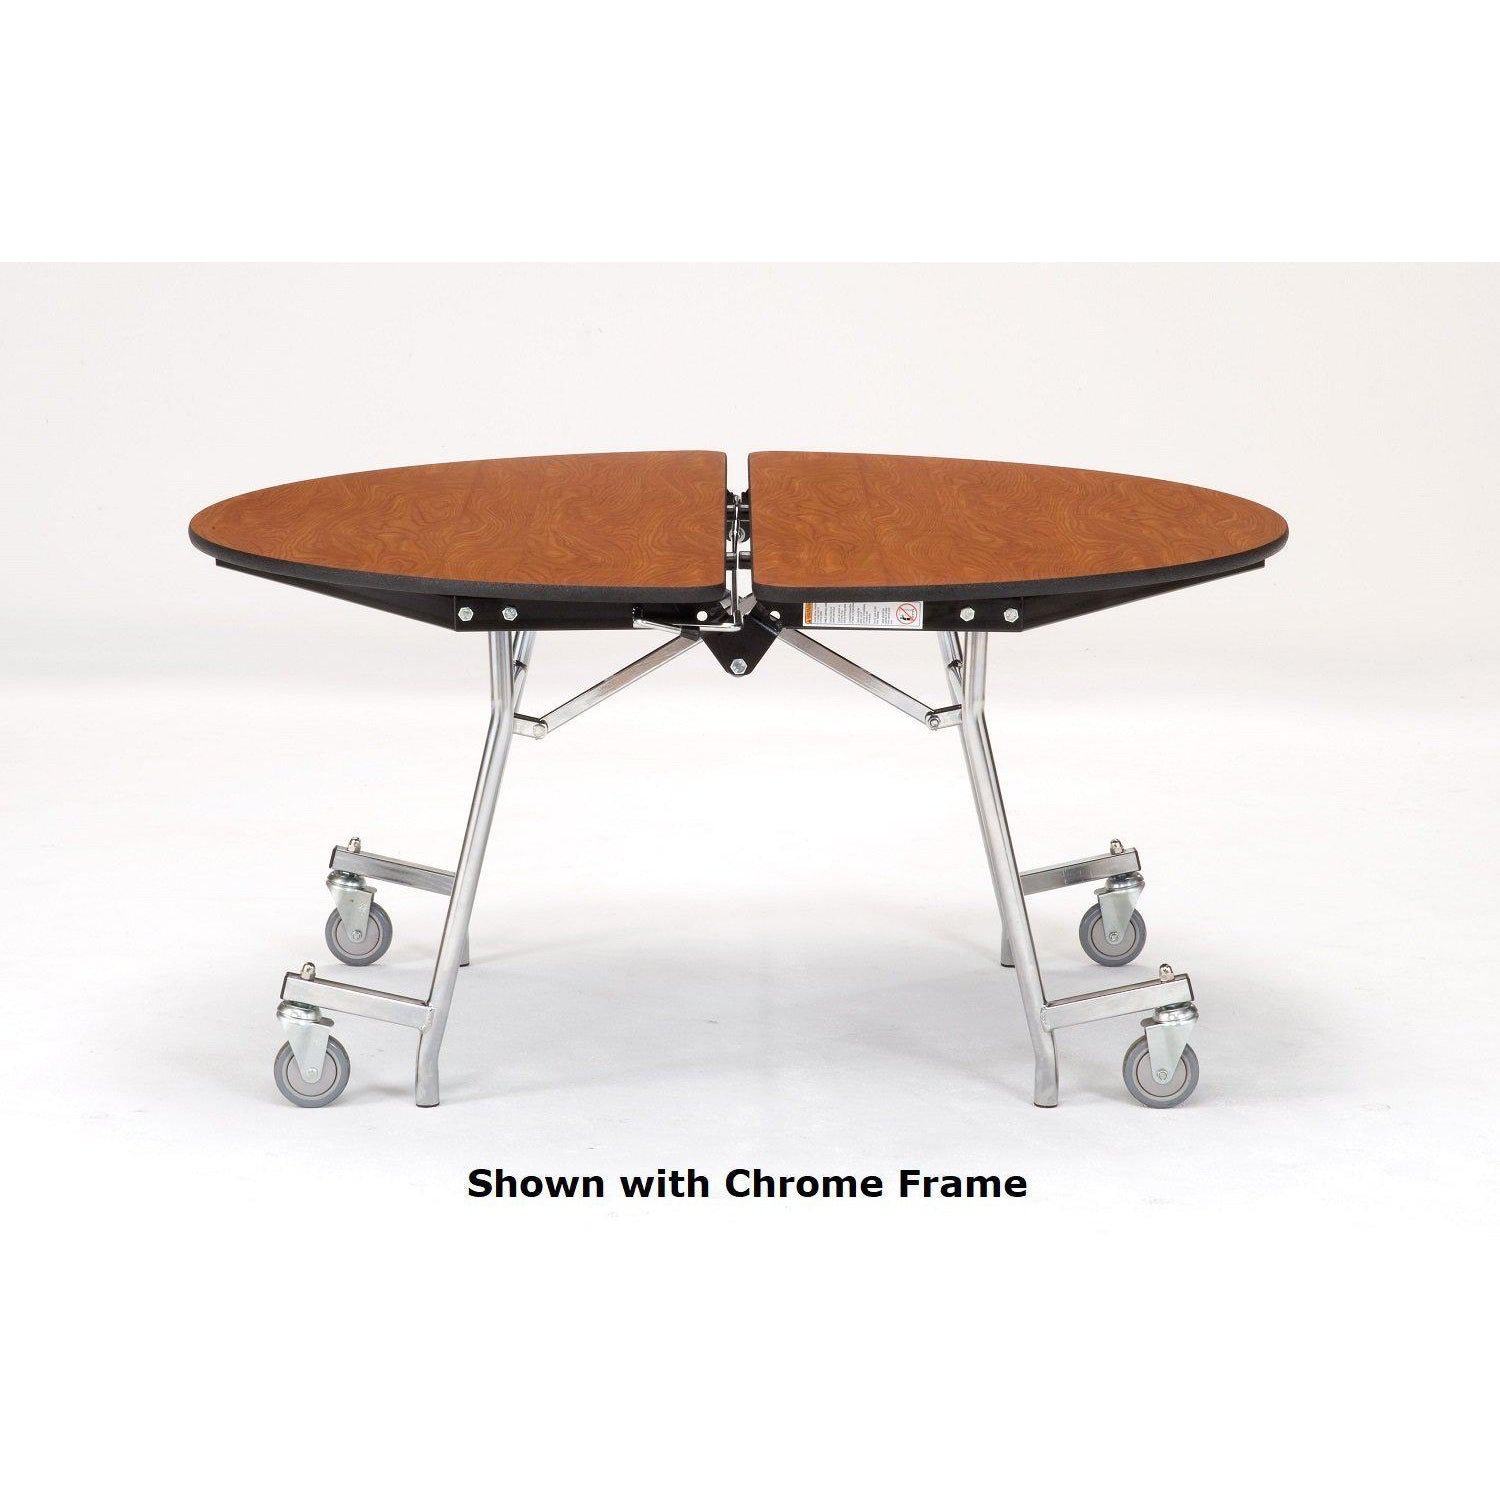 Mobile Shape Cafeteria Table, 48" Round, Plywood Core, Vinyl T-Mold Edge, Chrome Frame